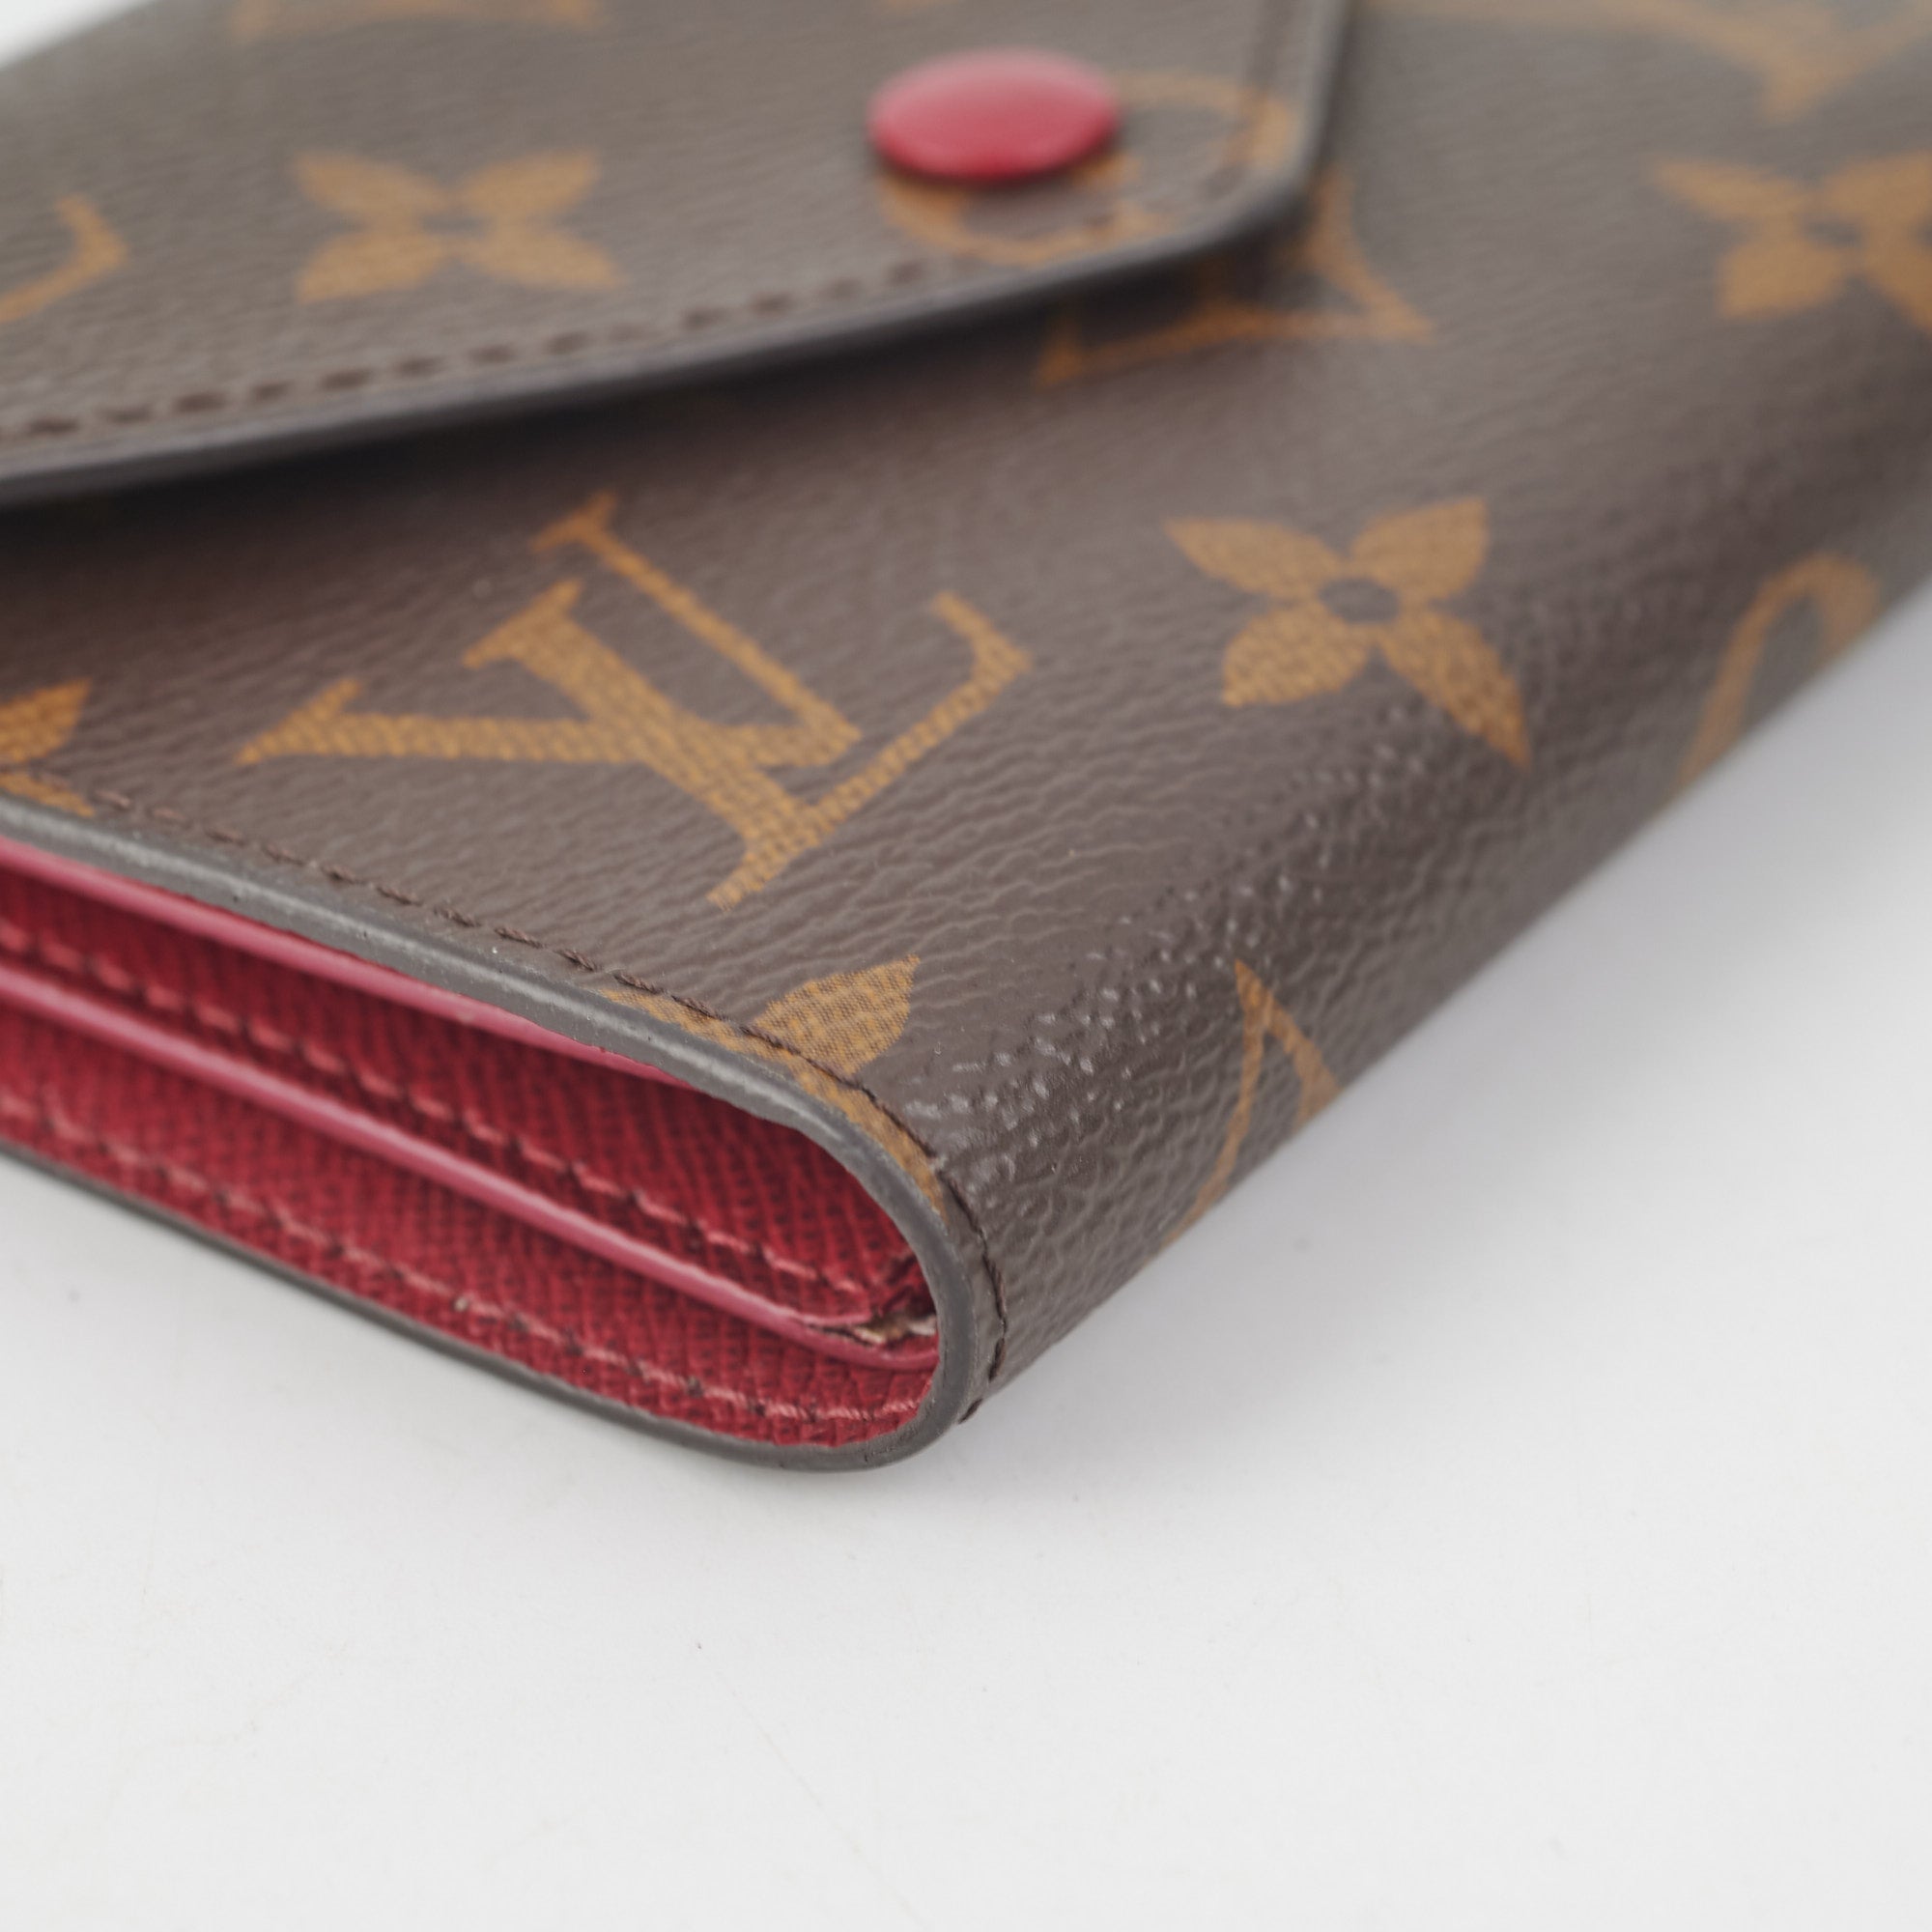 View 2 - Monogram SMALL LEATHER GOODS WALLETS Victorine Wallet, Louis  Vuitton ®